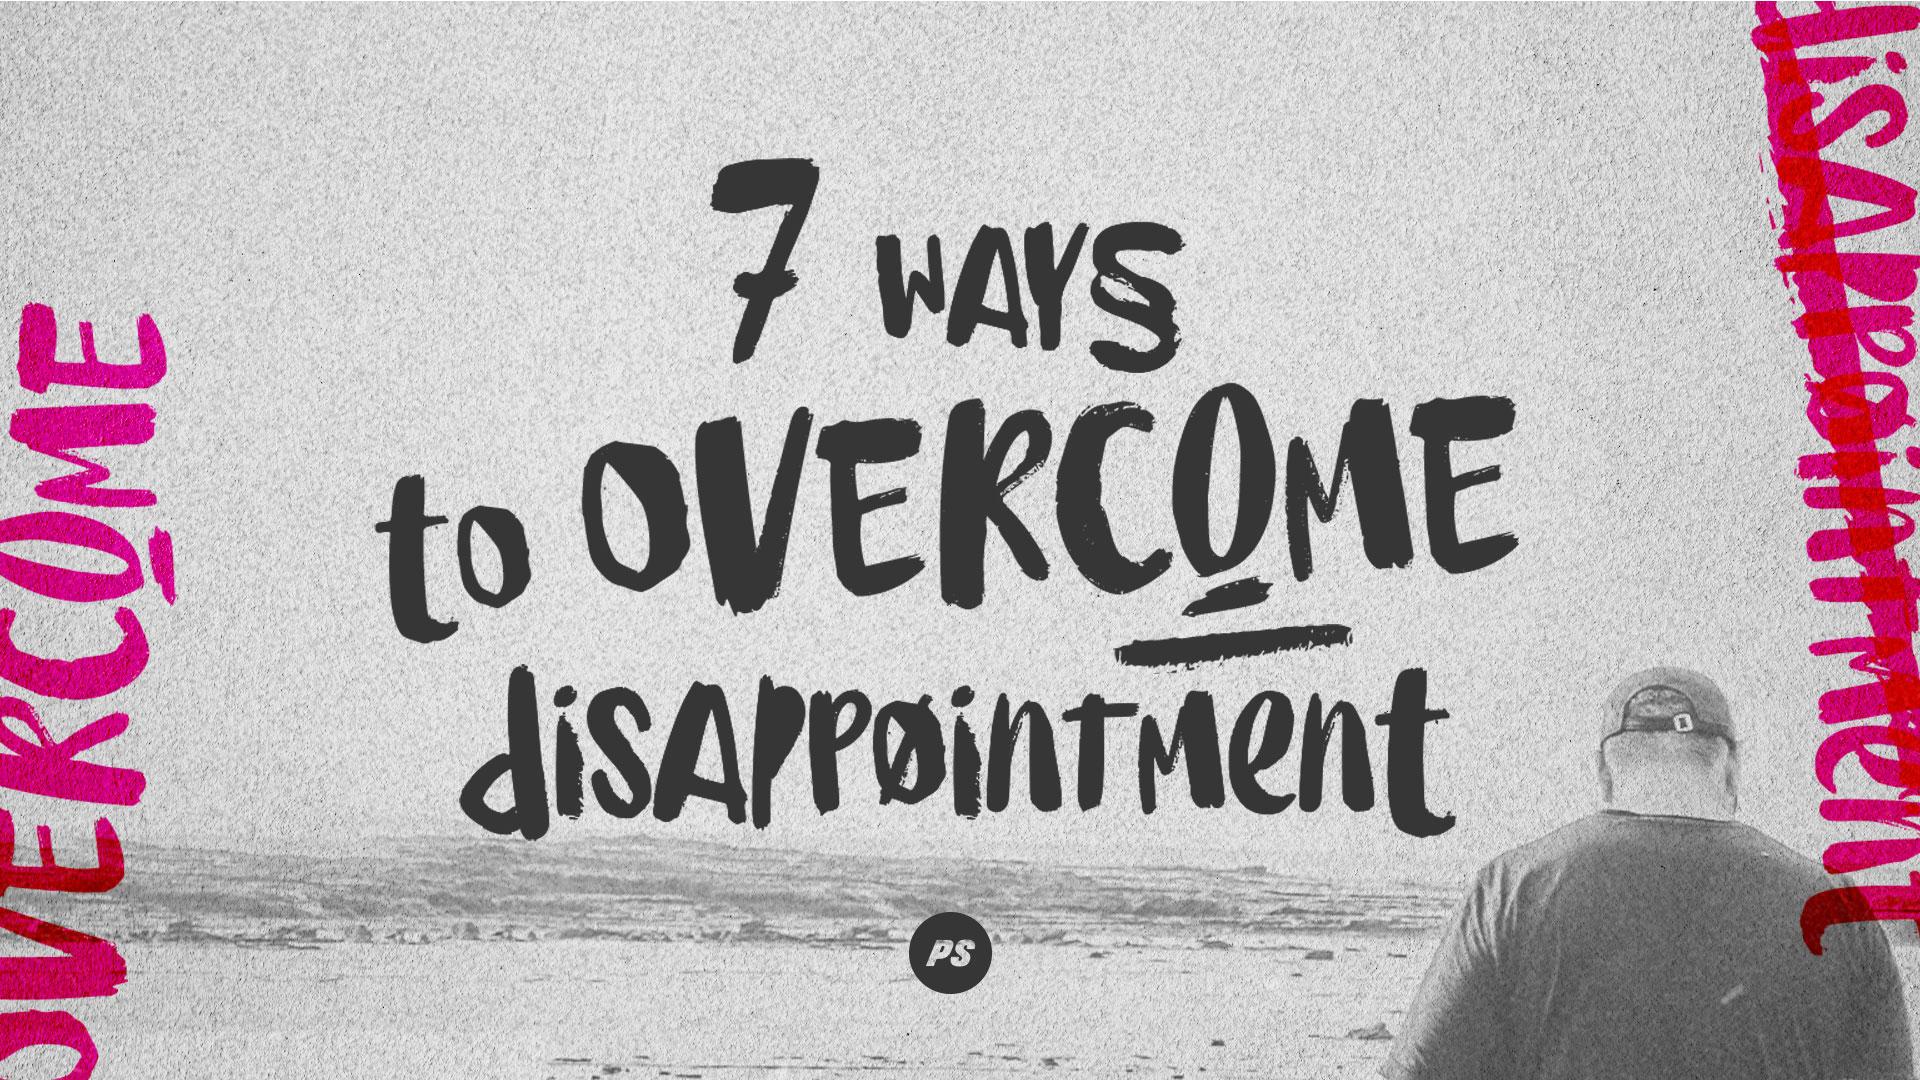 Featured image for “7 Ways to Overcome Disappointment”